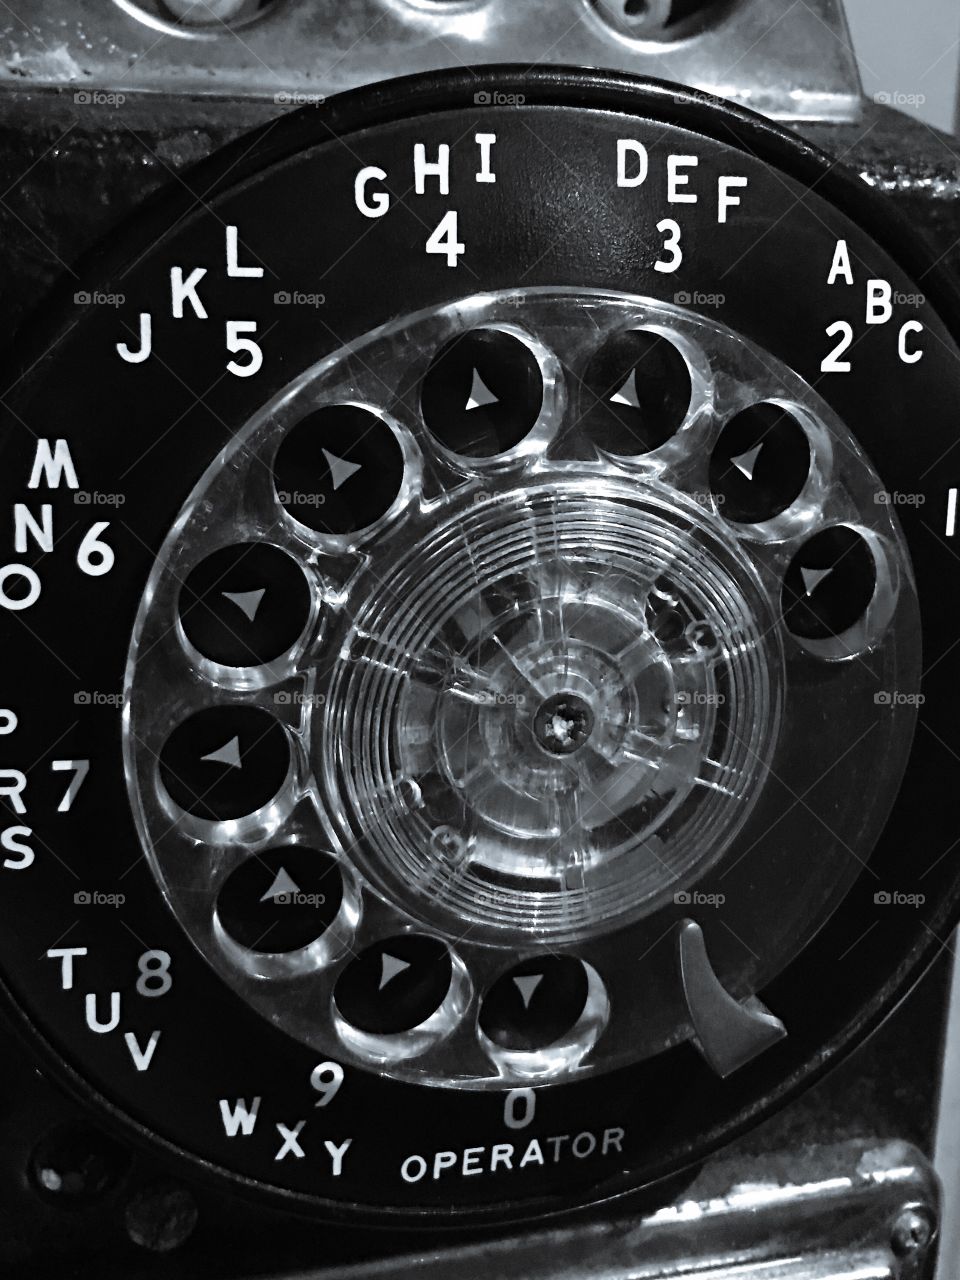 Antique rotary dial telephone in black and white. 